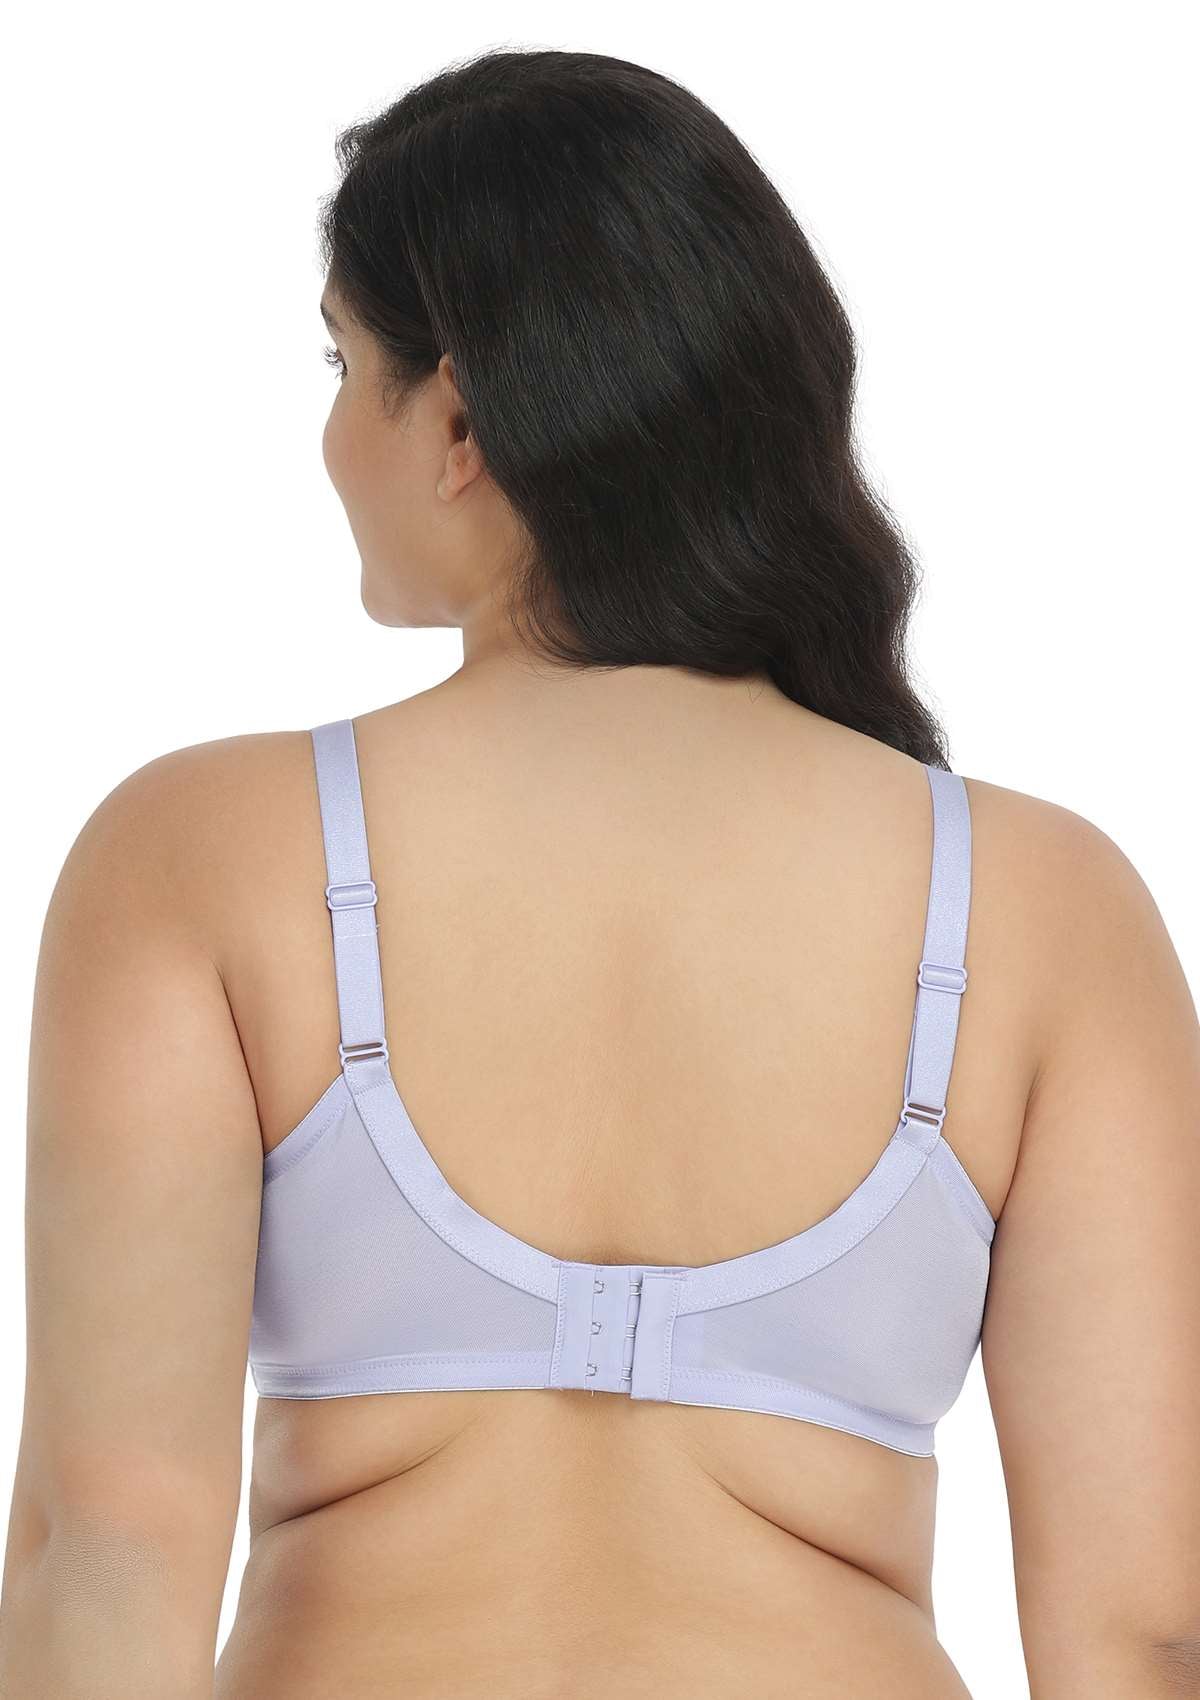 HSIA Wisteria Bra For Lift And Support - Full Coverage Minimizer Bra - Light Pink / 38 / D